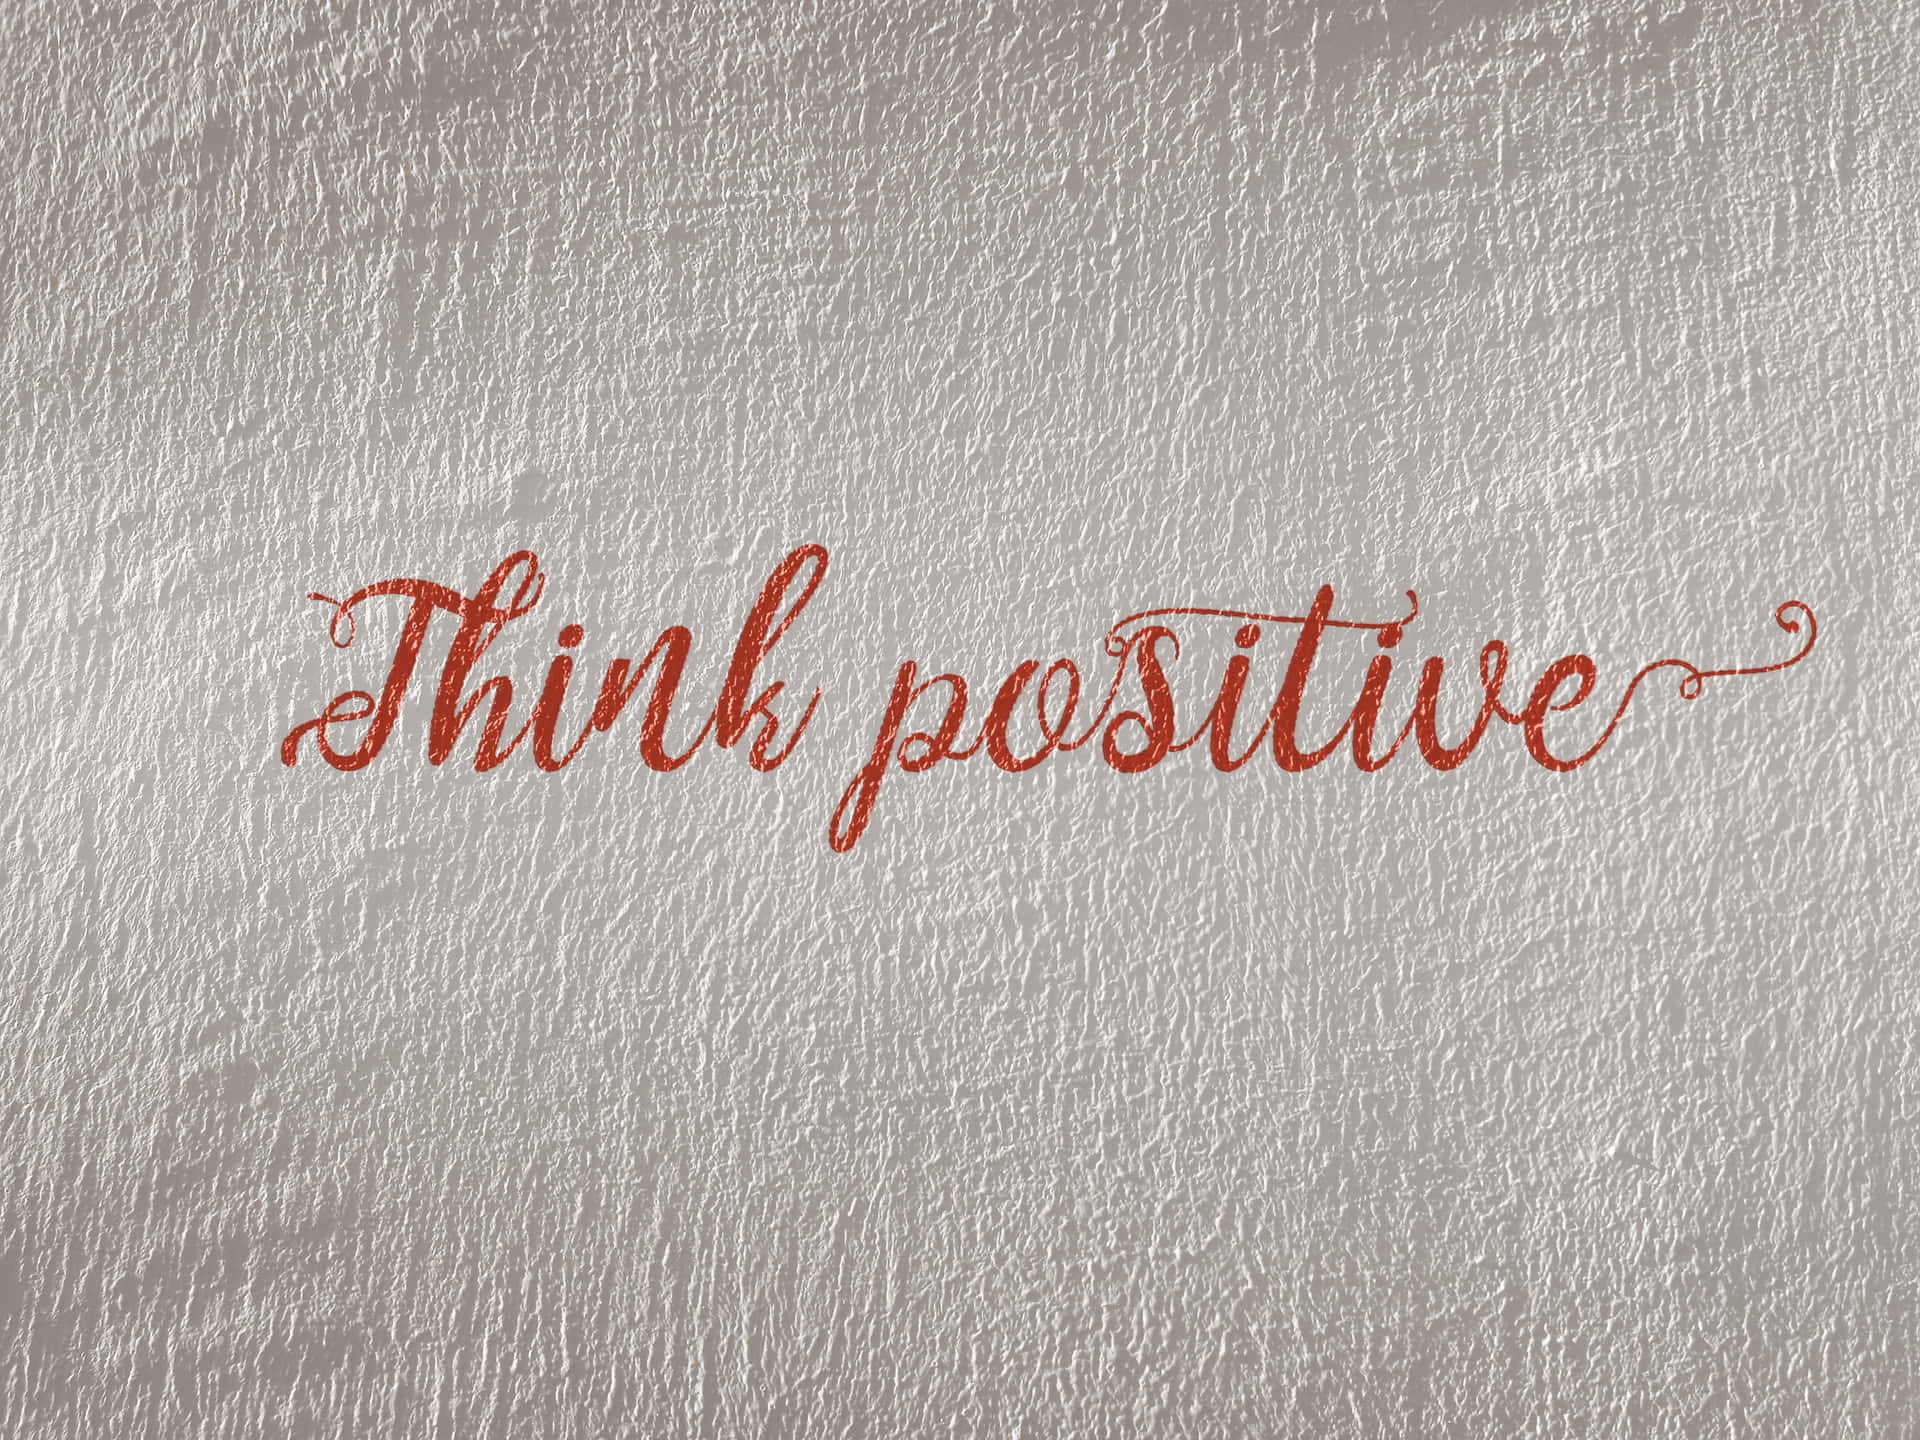 Think Positive On A White Background Wallpaper